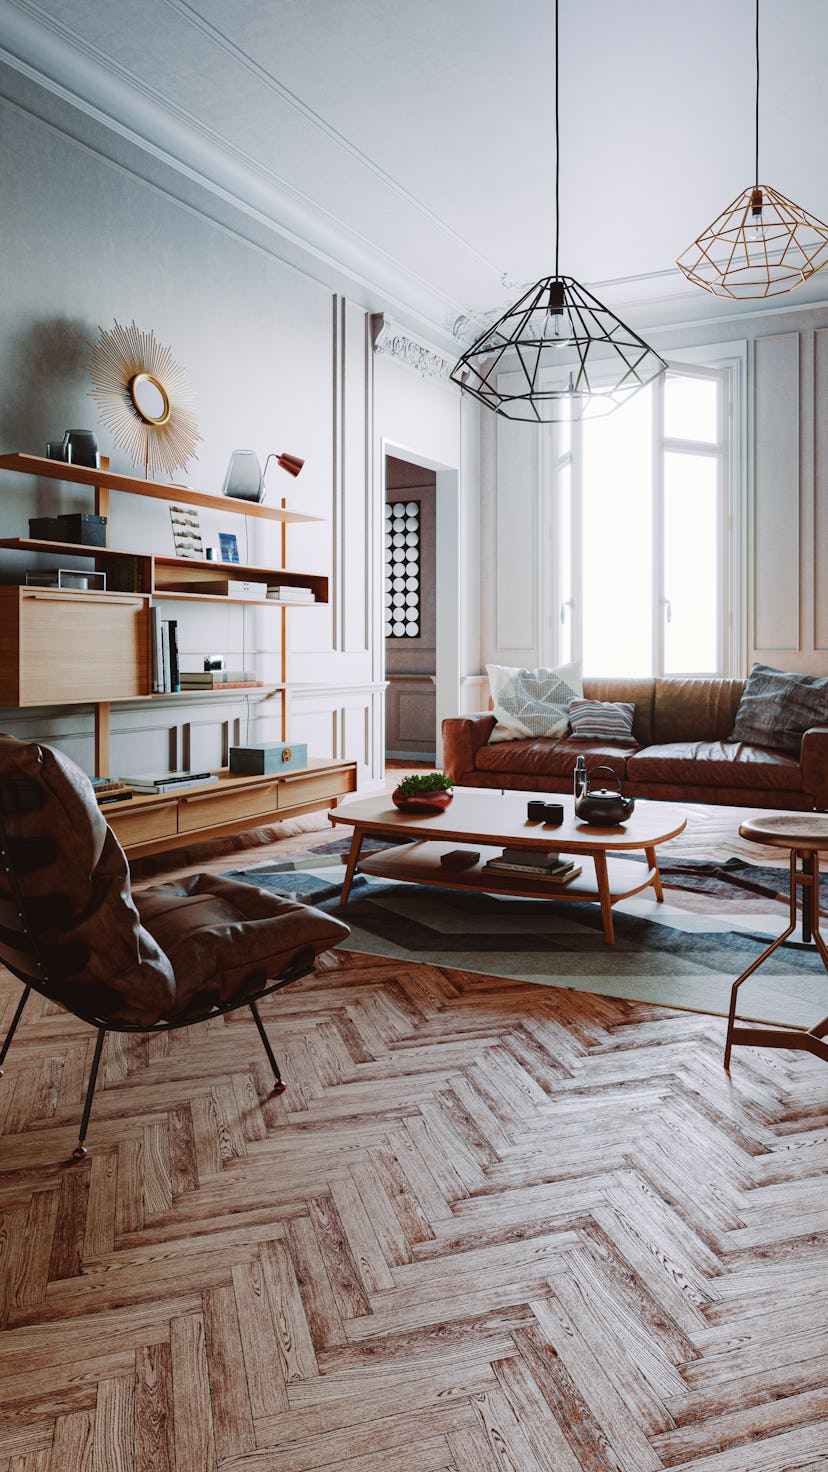 Retro living room. 3D generated image. Image on the wall is just a texture shot of an old rug.